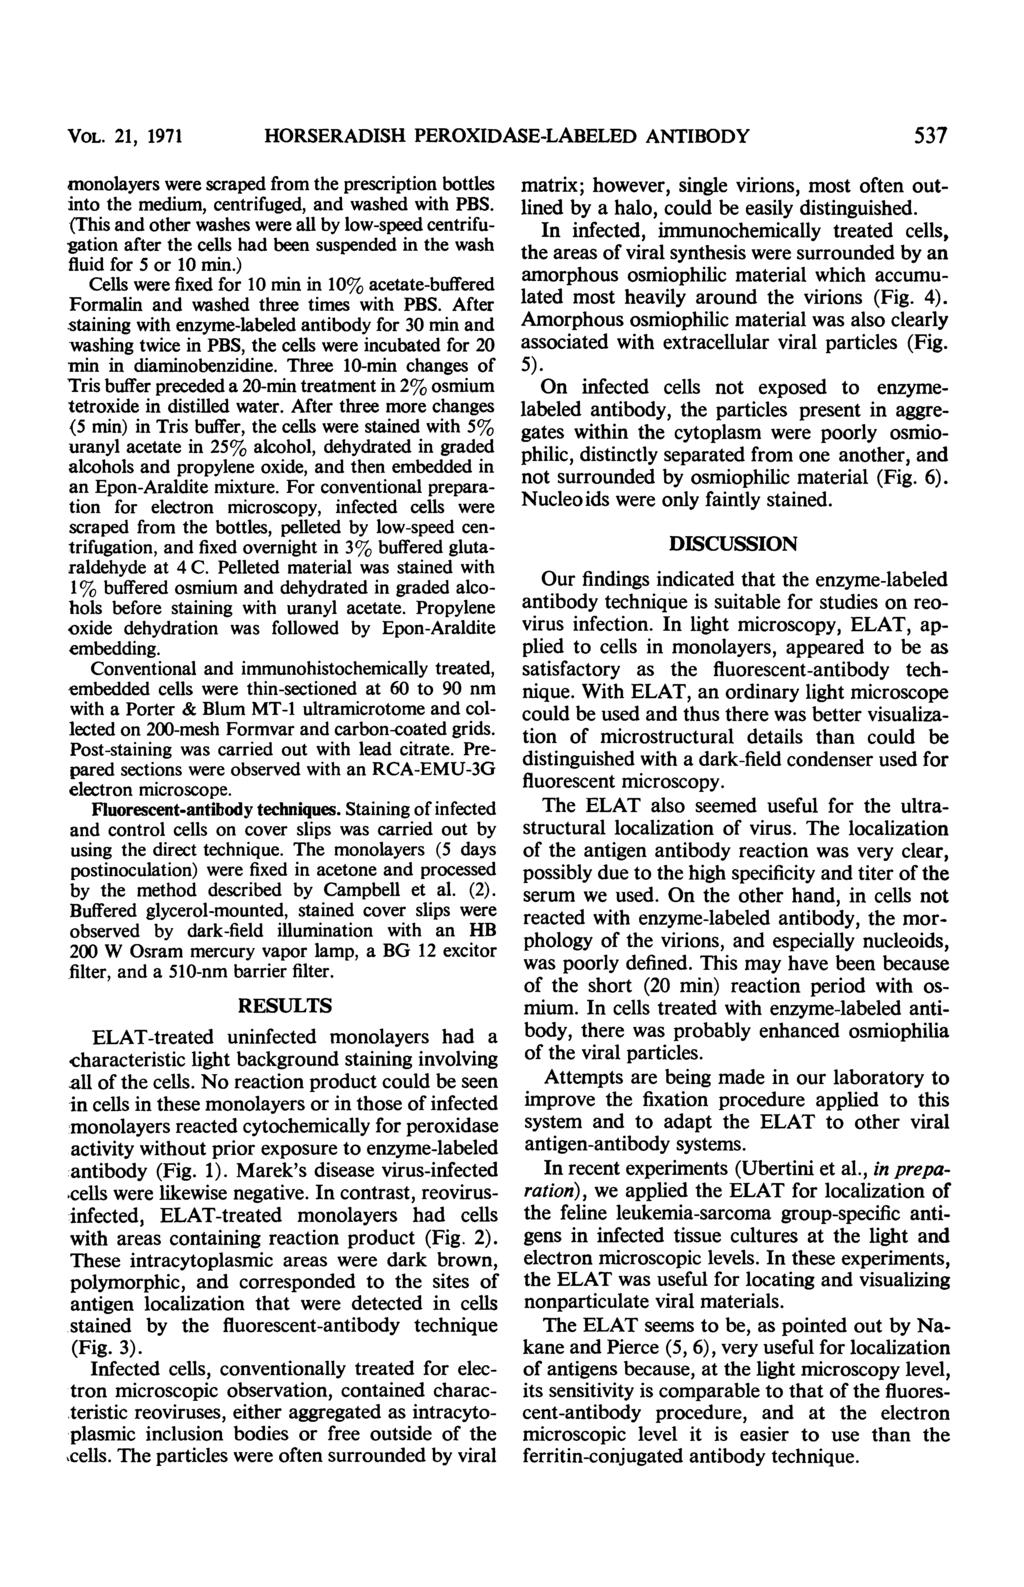 VOL. 21, 1971 HORSERADISH PEROXIDASE-LABELED ANTIBODY 537 monolayers were scraped from the prescription bottles into the medium, centrifuged, and washed with PBS.